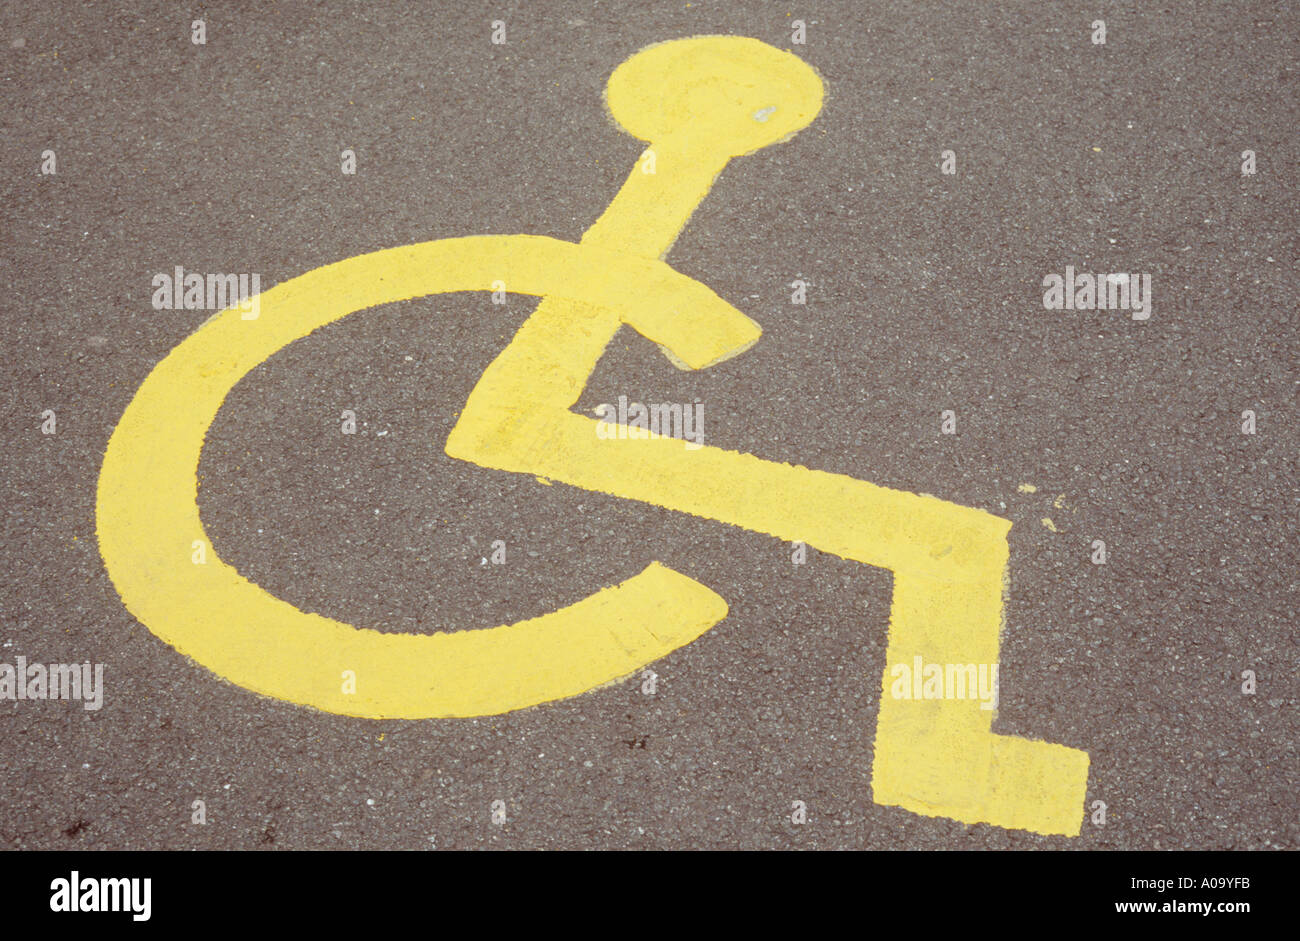 Symbol of person in wheelchair painted in yellow on road or carpark surface indicating Parking bay for disabled people only Stock Photo